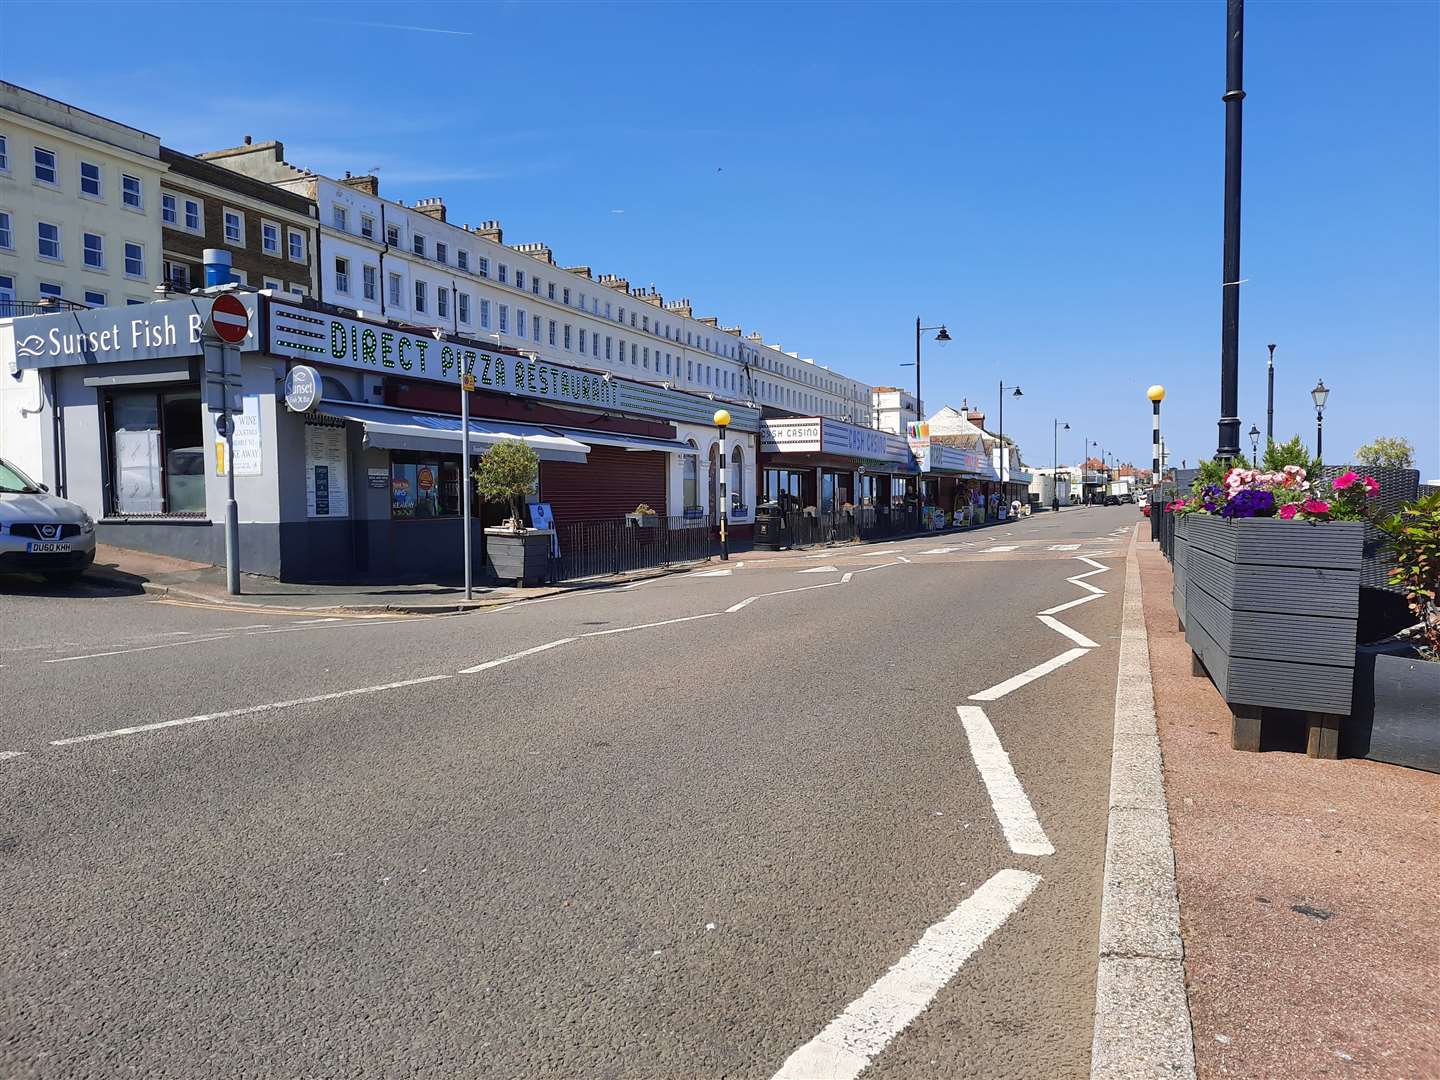 The incidents all happened in Central Parade, Herne Bay